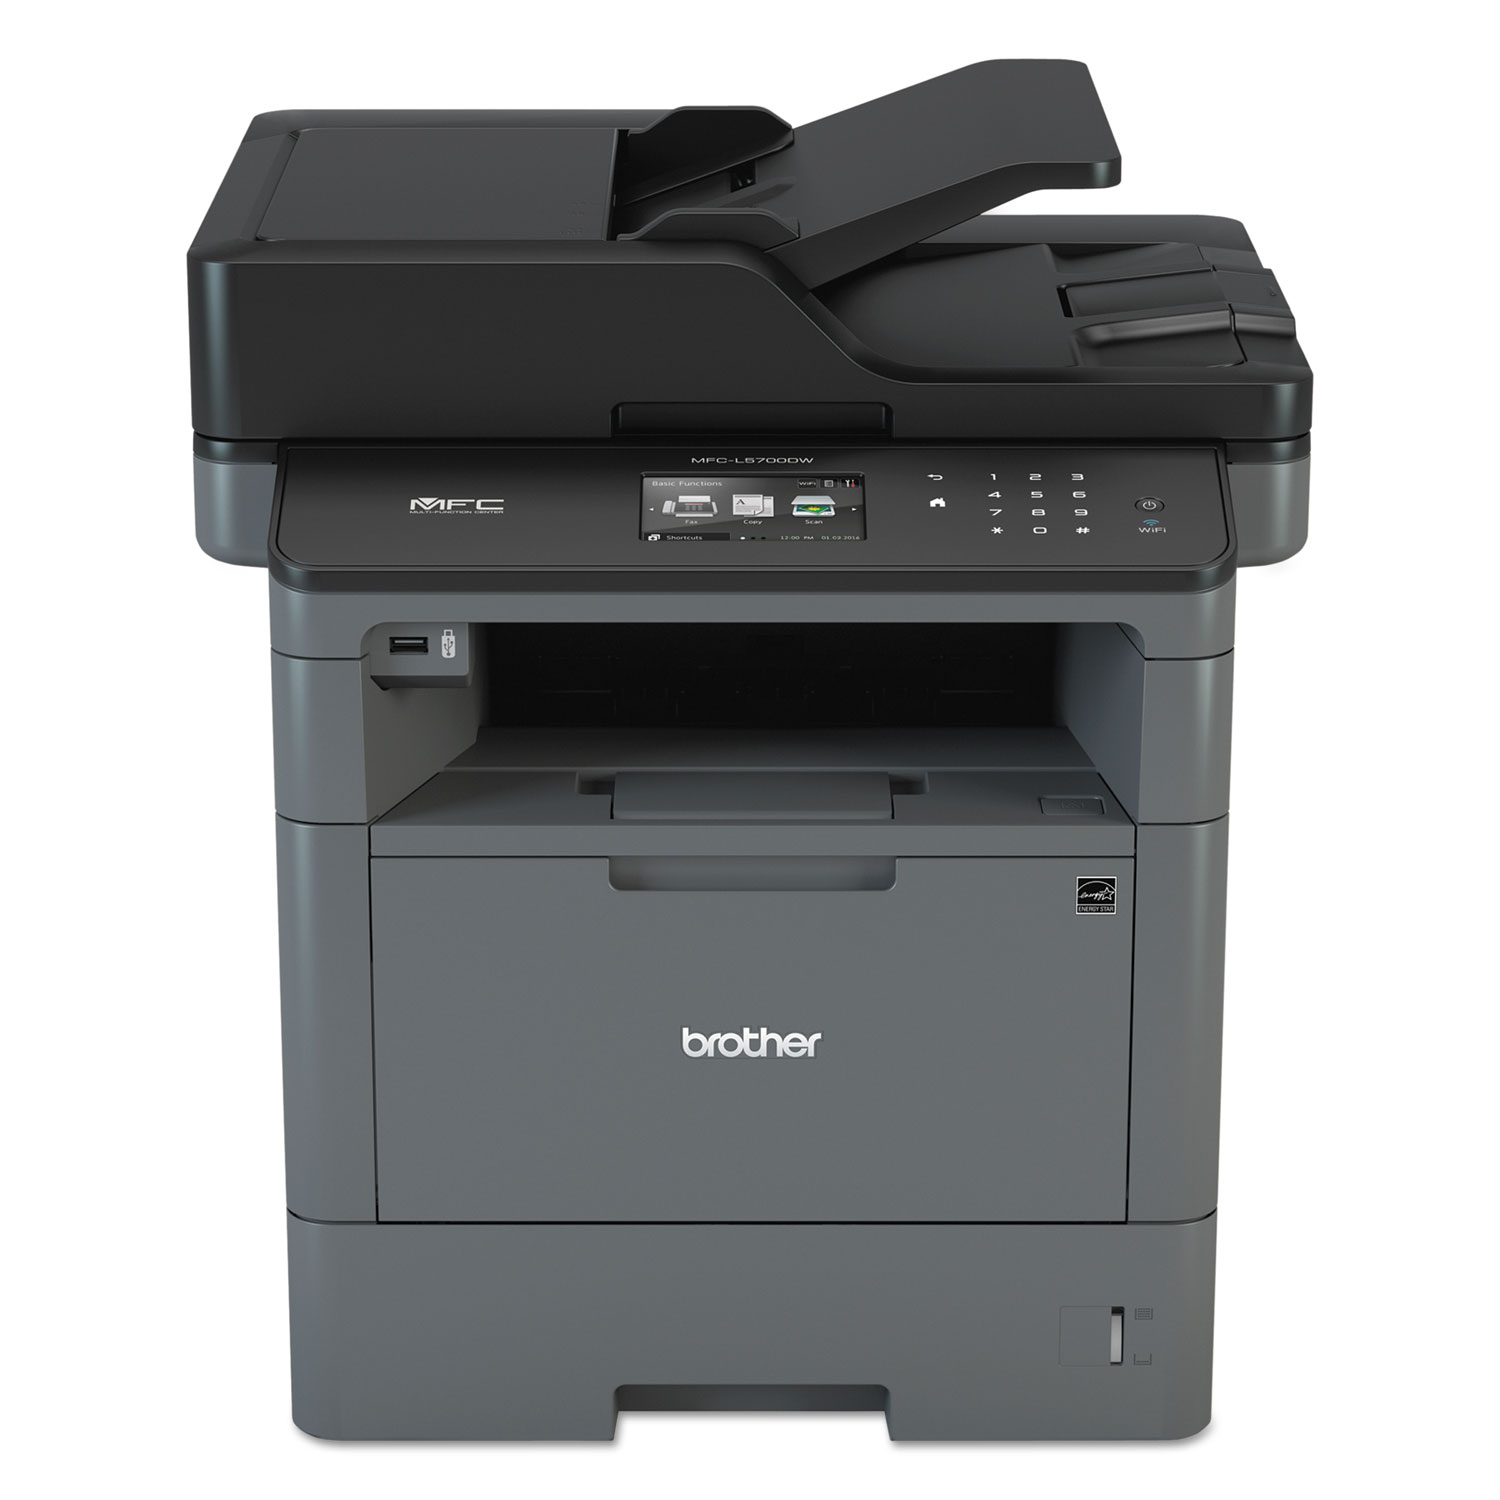  Brother MFCL5700DW MFCL5700DW Business Laser All-in-One Printer with Duplex Printing and Wireless Networking (BRTMFCL5700DW) 